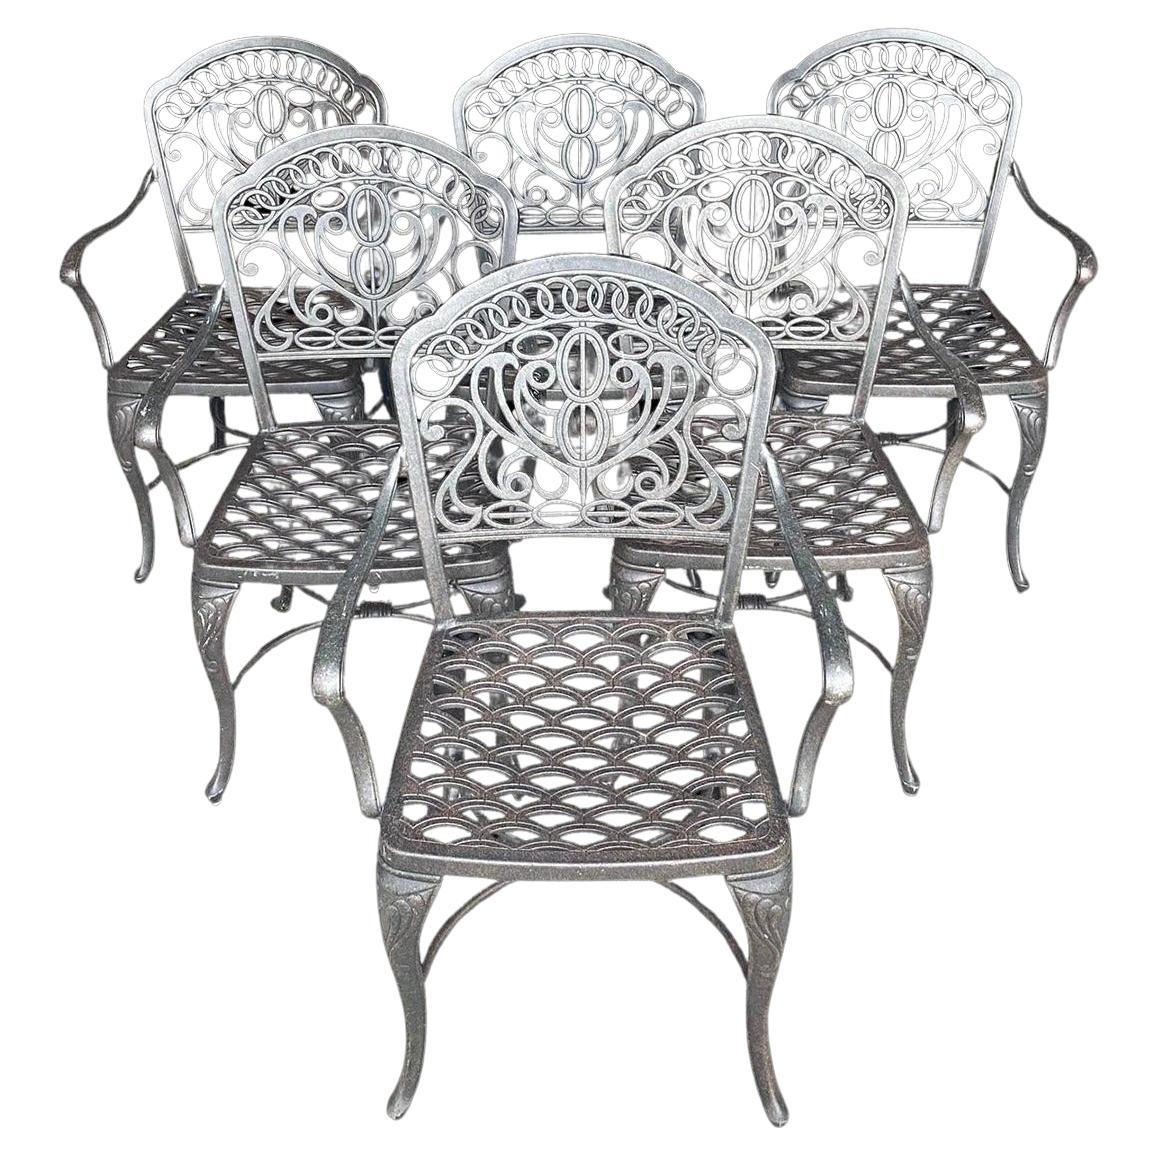 What is the best outdoor dining furniture?